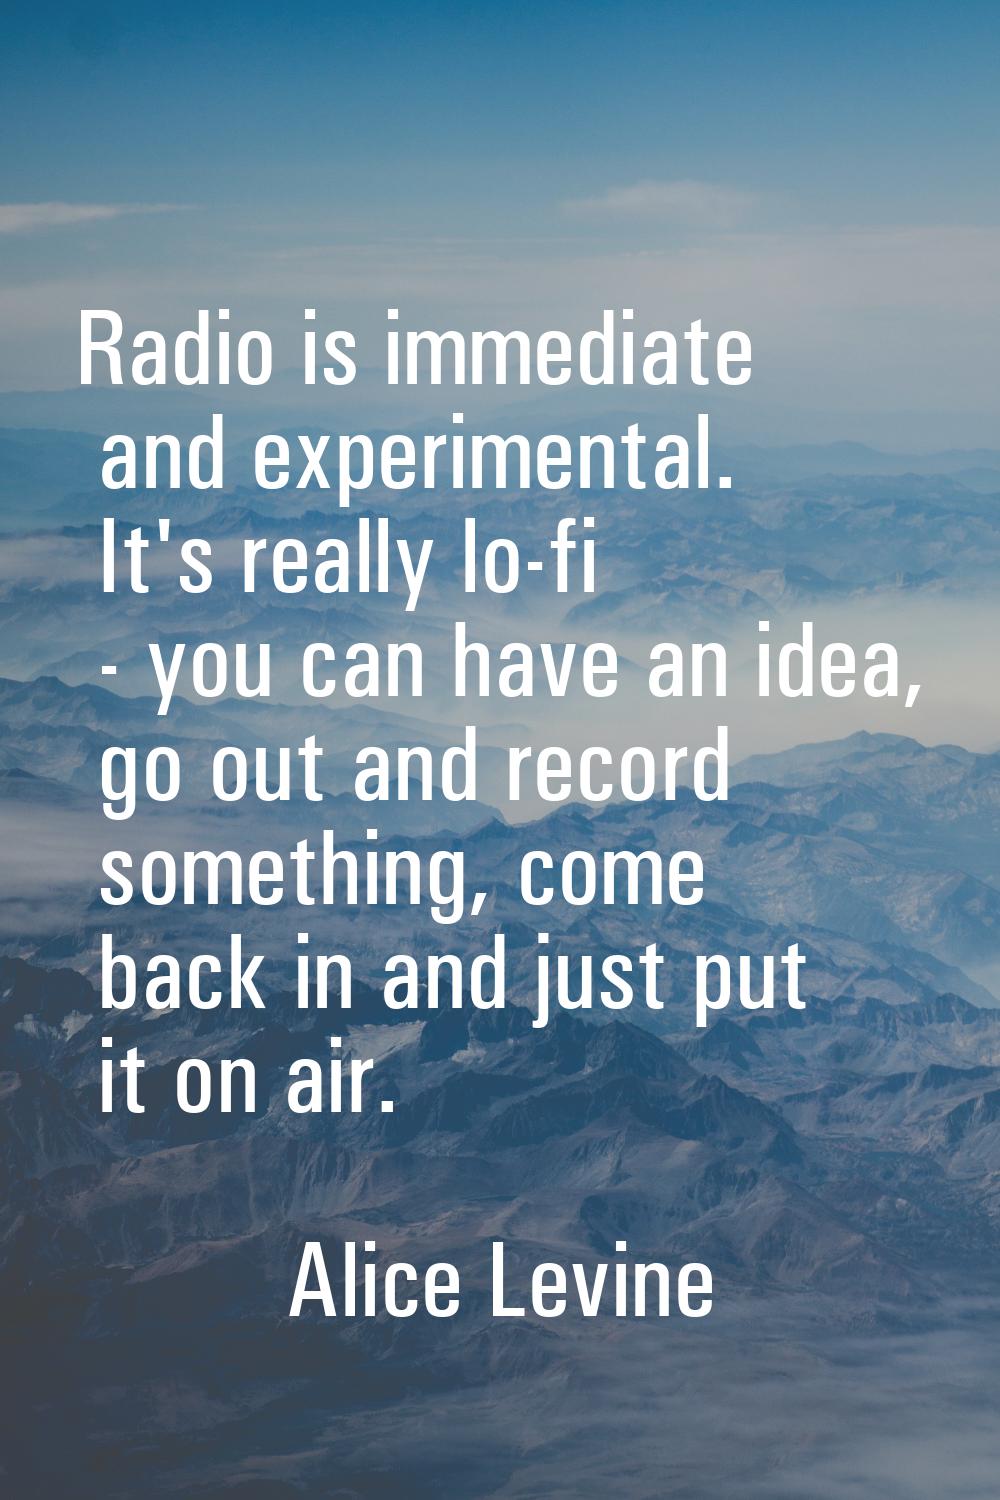 Radio is immediate and experimental. It's really lo-fi - you can have an idea, go out and record so